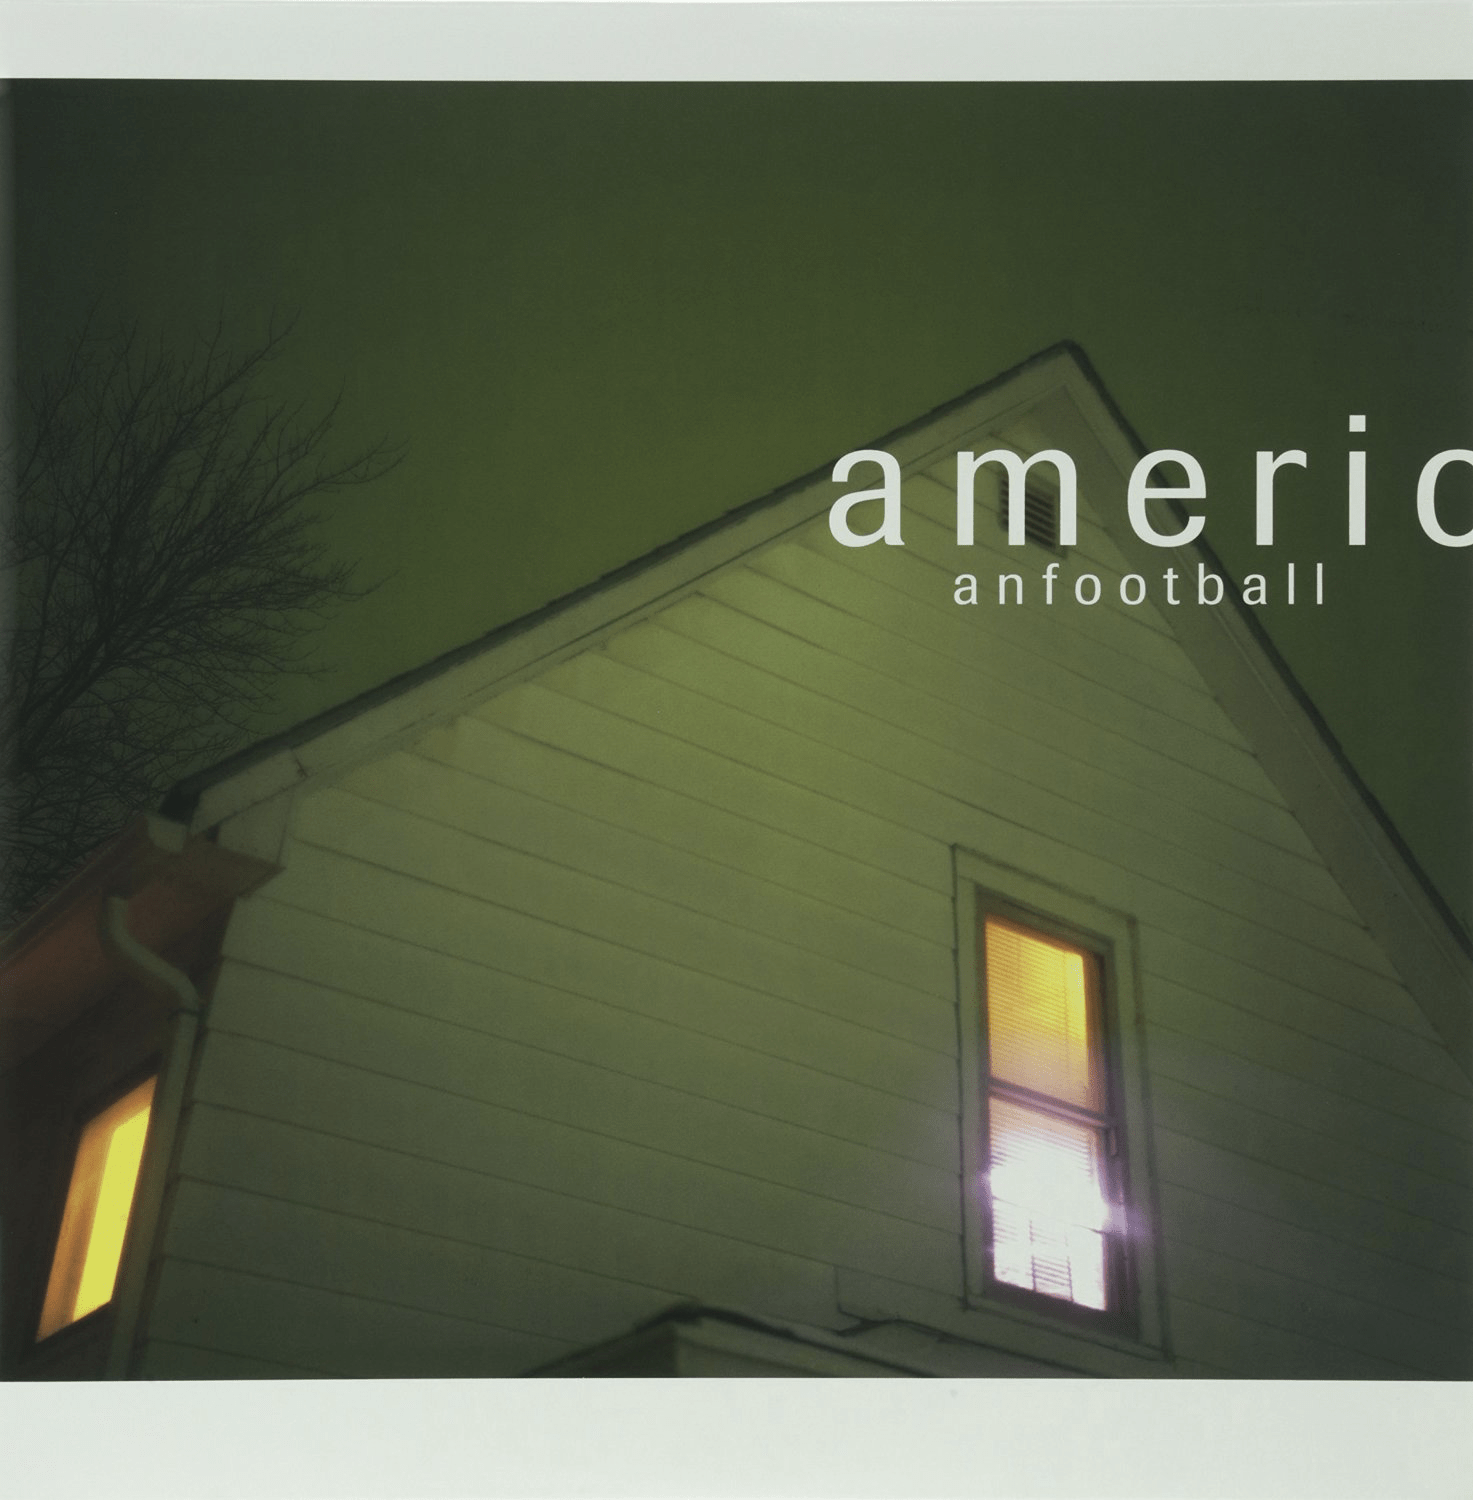 The album cover to American Football's first album. It features the roof of a house bathed in green light. Two windows are visible, with yellow light pouring from inside the home. The text "American Football" is written in the top right corner